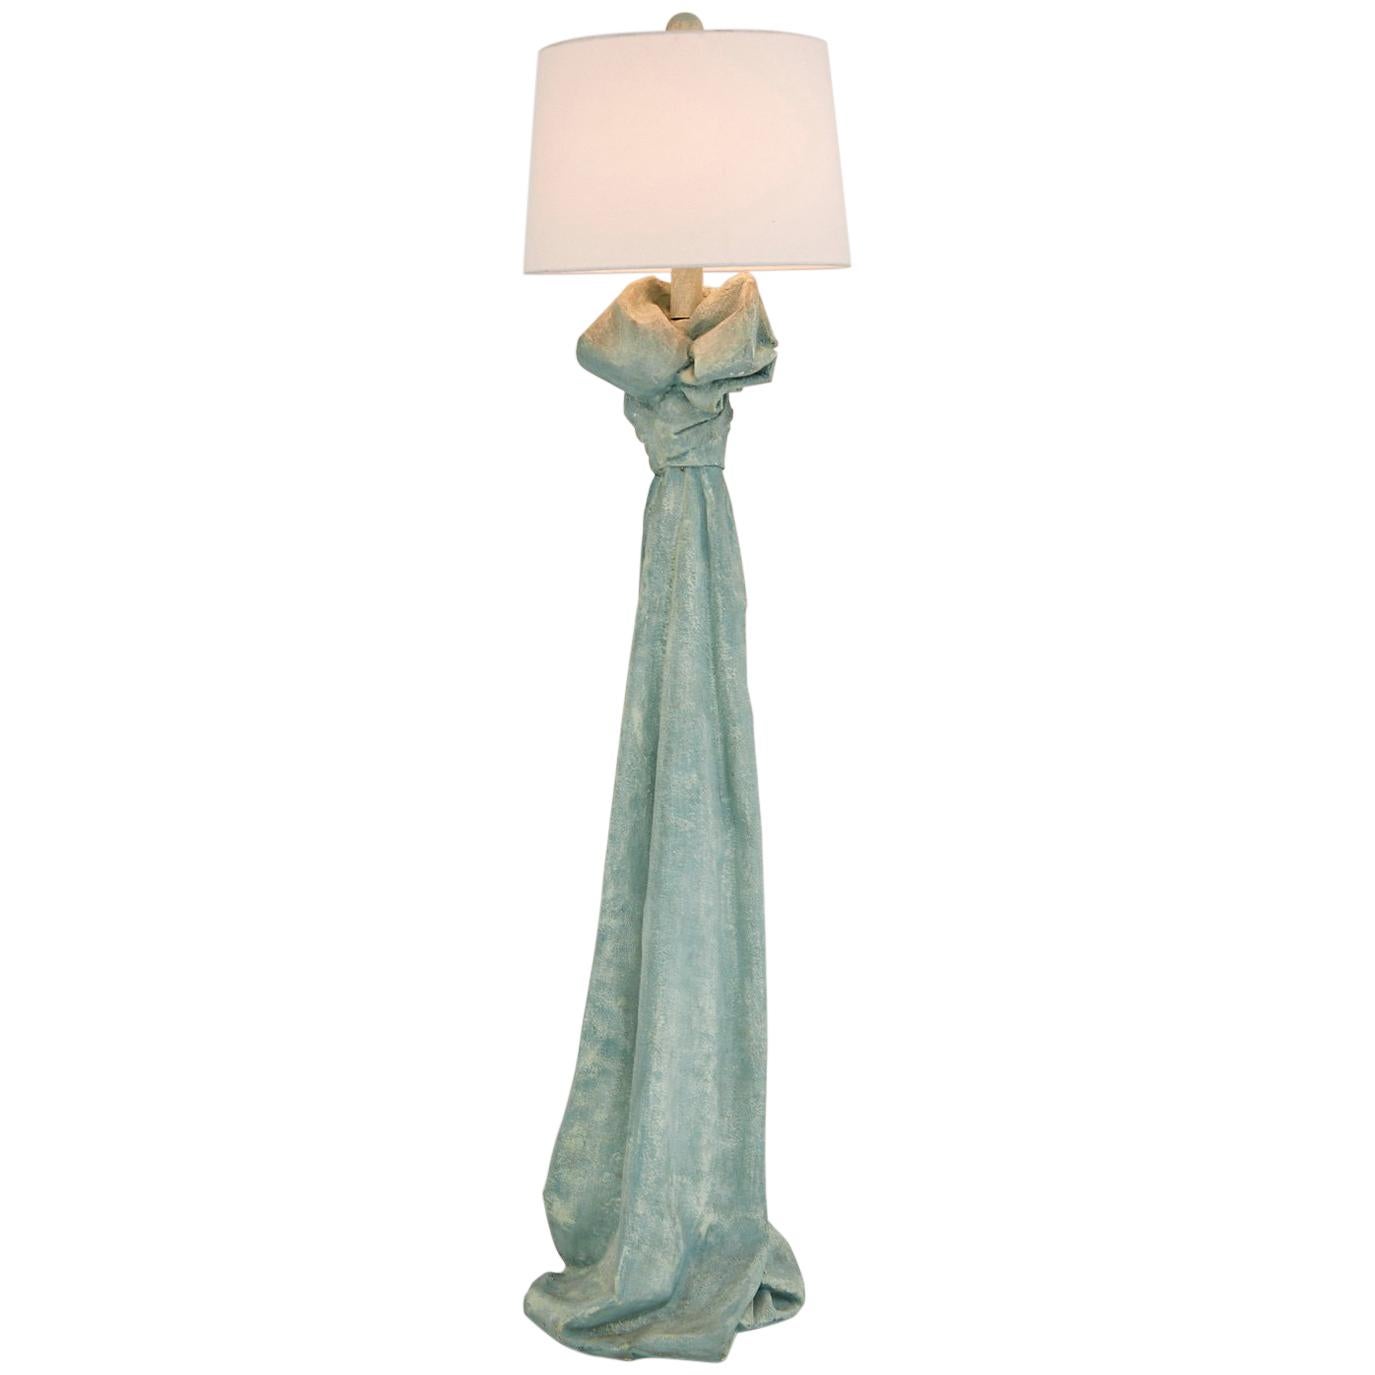 Faux Draped Fabric Floor Lamp in the Manner of John Dickinson, 1980s